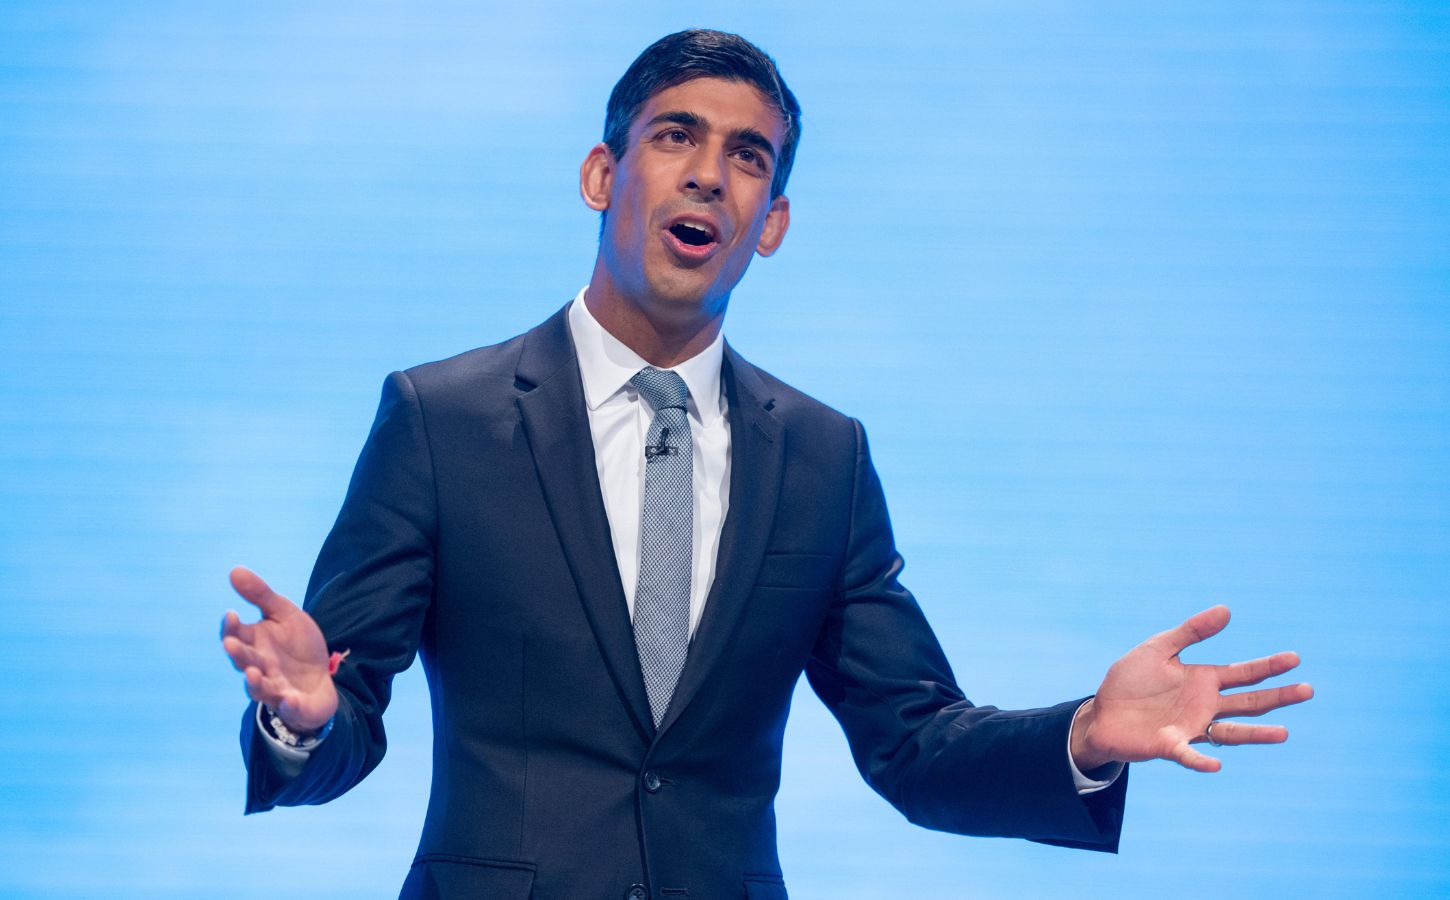 UK Prime Minister Rishi Sunak, who recently claimed to have scrapped a meat tax